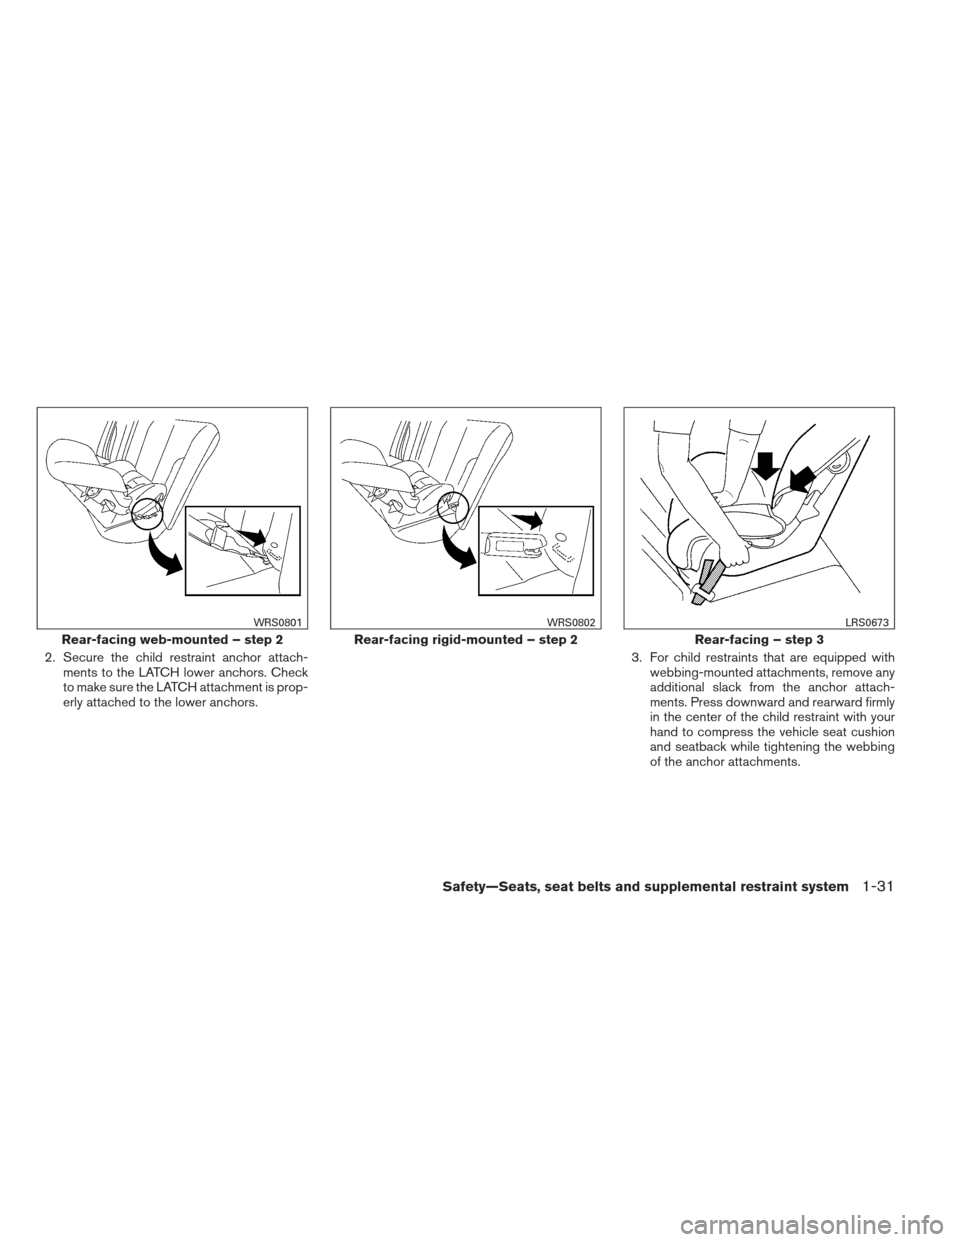 NISSAN XTERRA 2012 N50 / 2.G Service Manual 2. Secure the child restraint anchor attach-ments to the LATCH lower anchors. Check
to make sure the LATCH attachment is prop-
erly attached to the lower anchors. 3. For child restraints that are equi